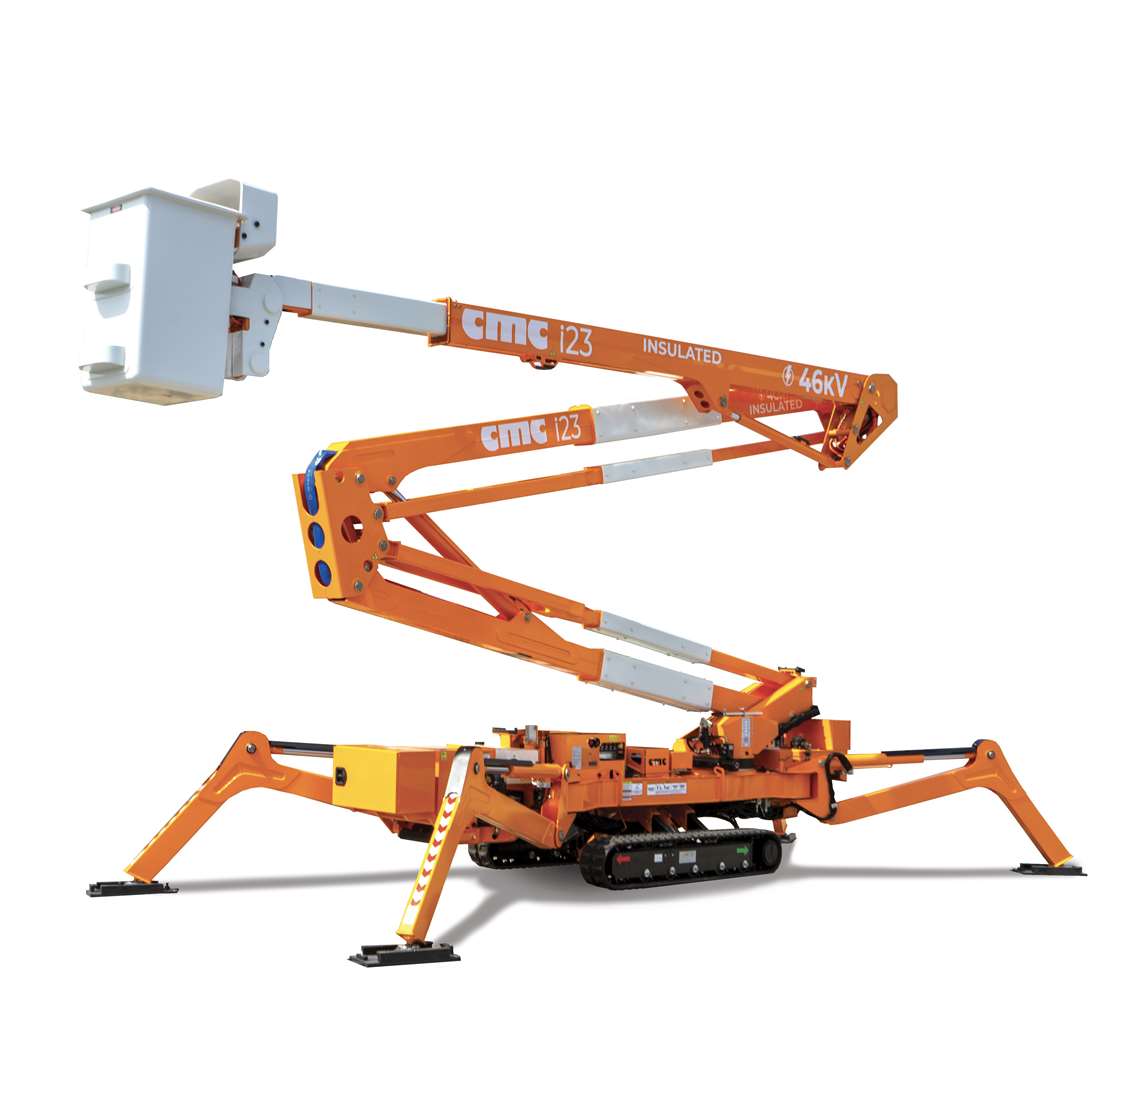 The CMC i23 insulated spider lift